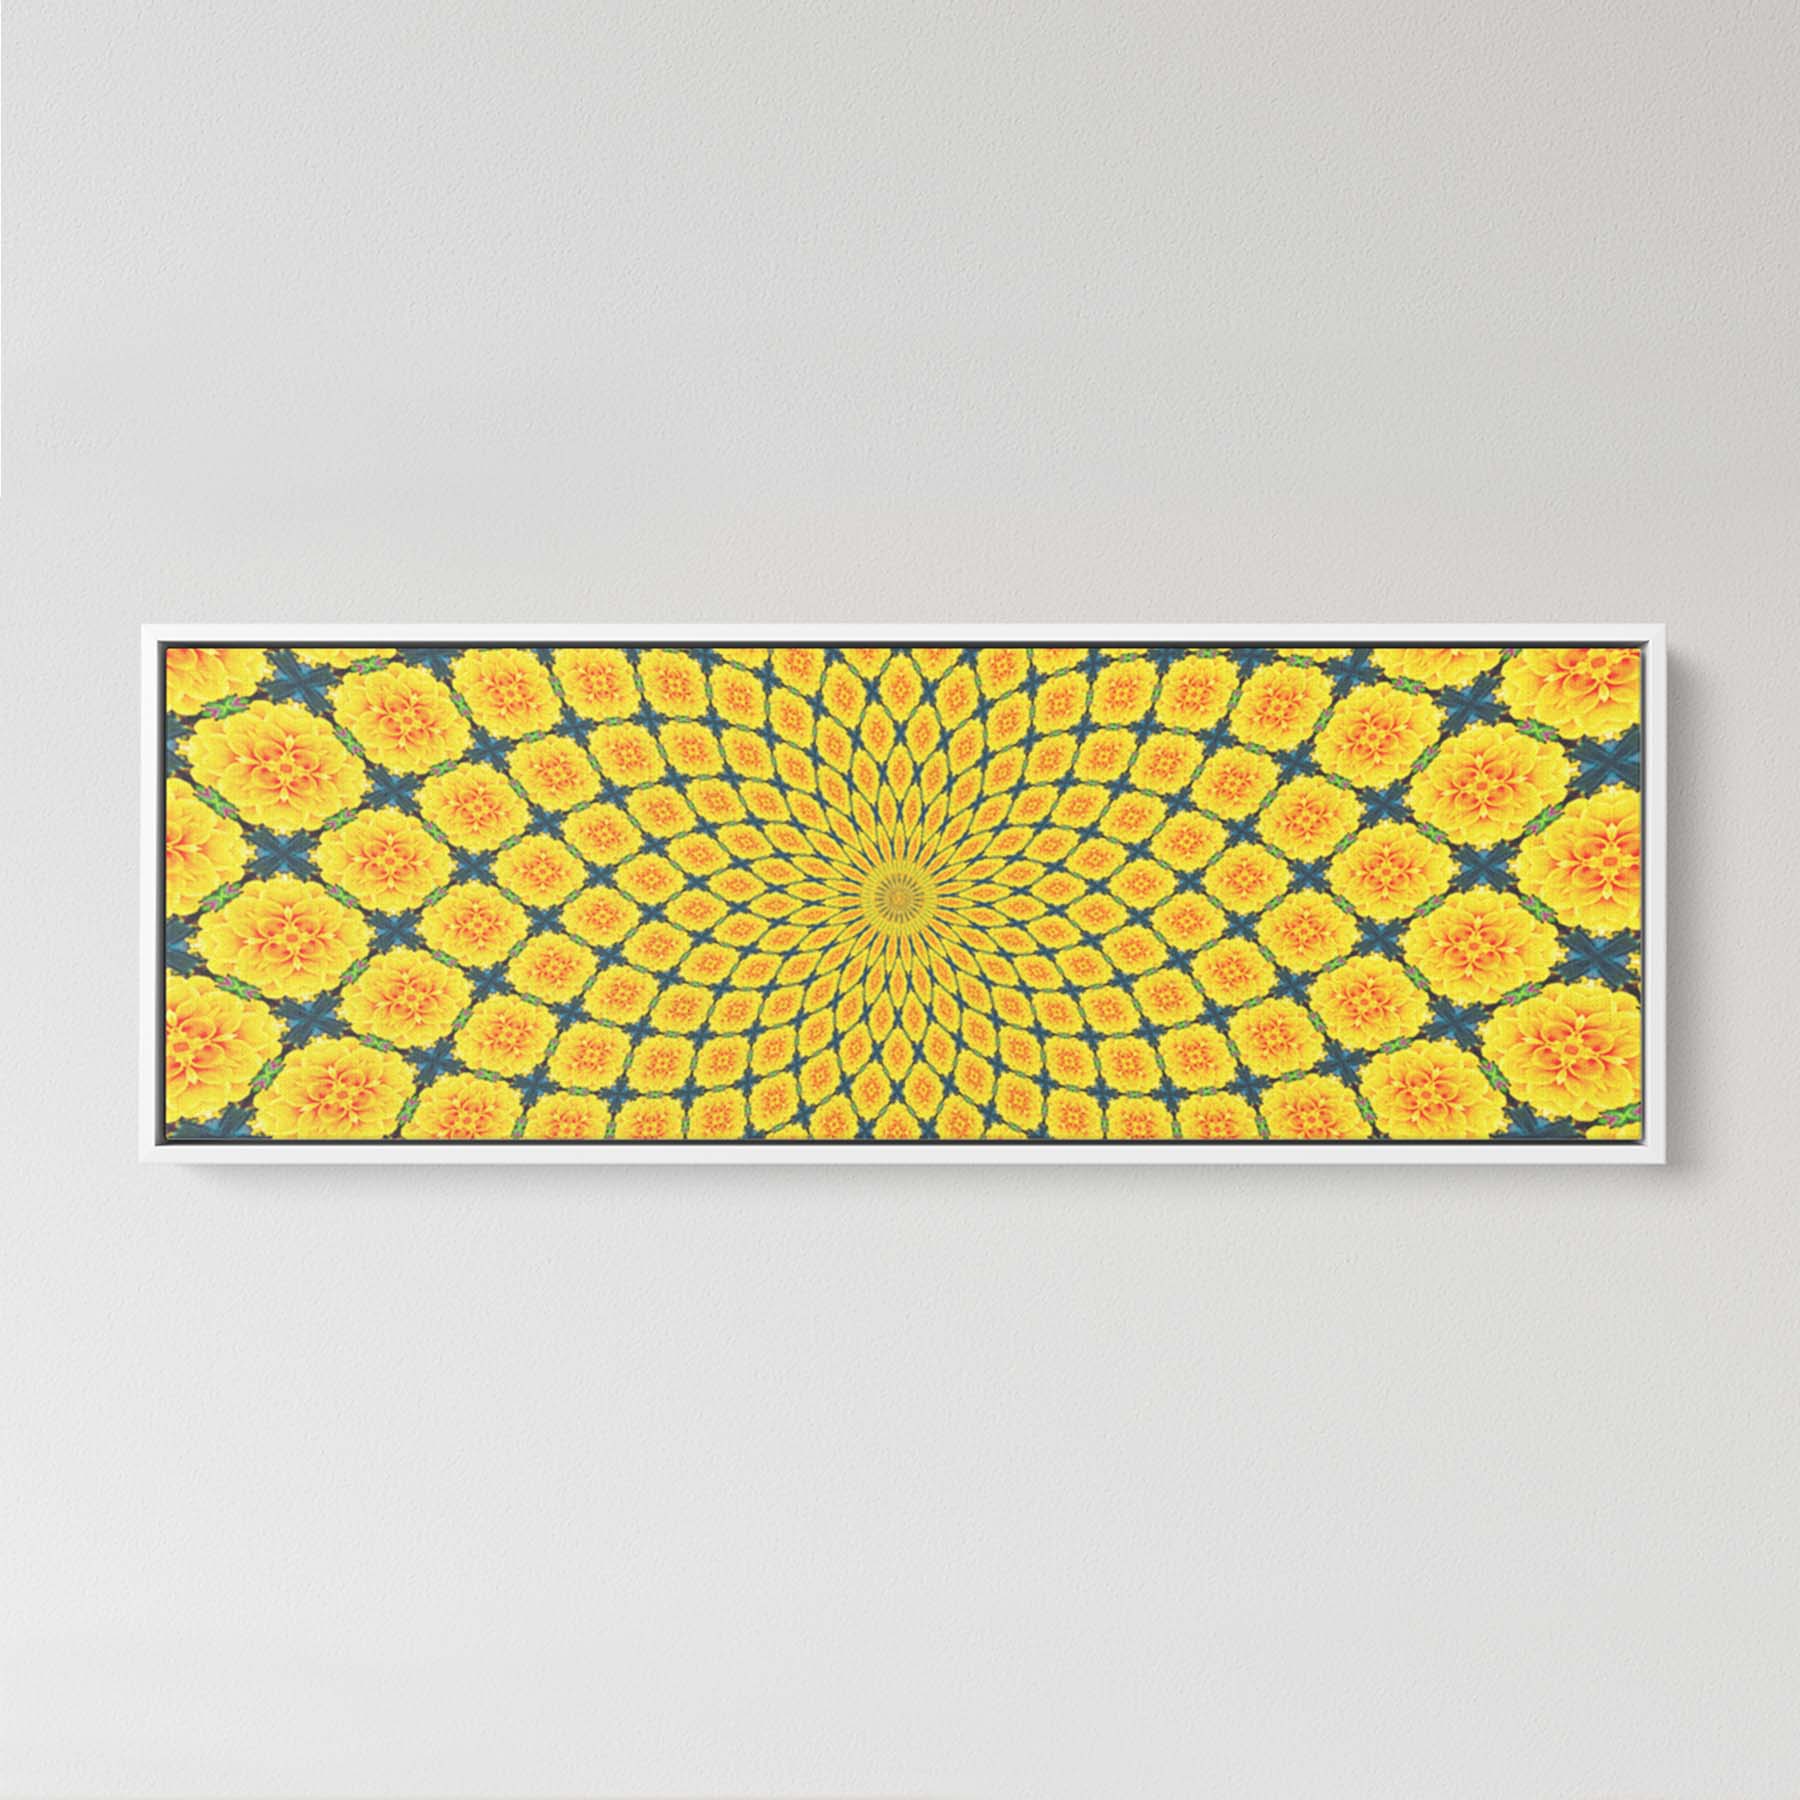 Flowers Of Life vortex - Panoramic Framed Canvas(#2623)